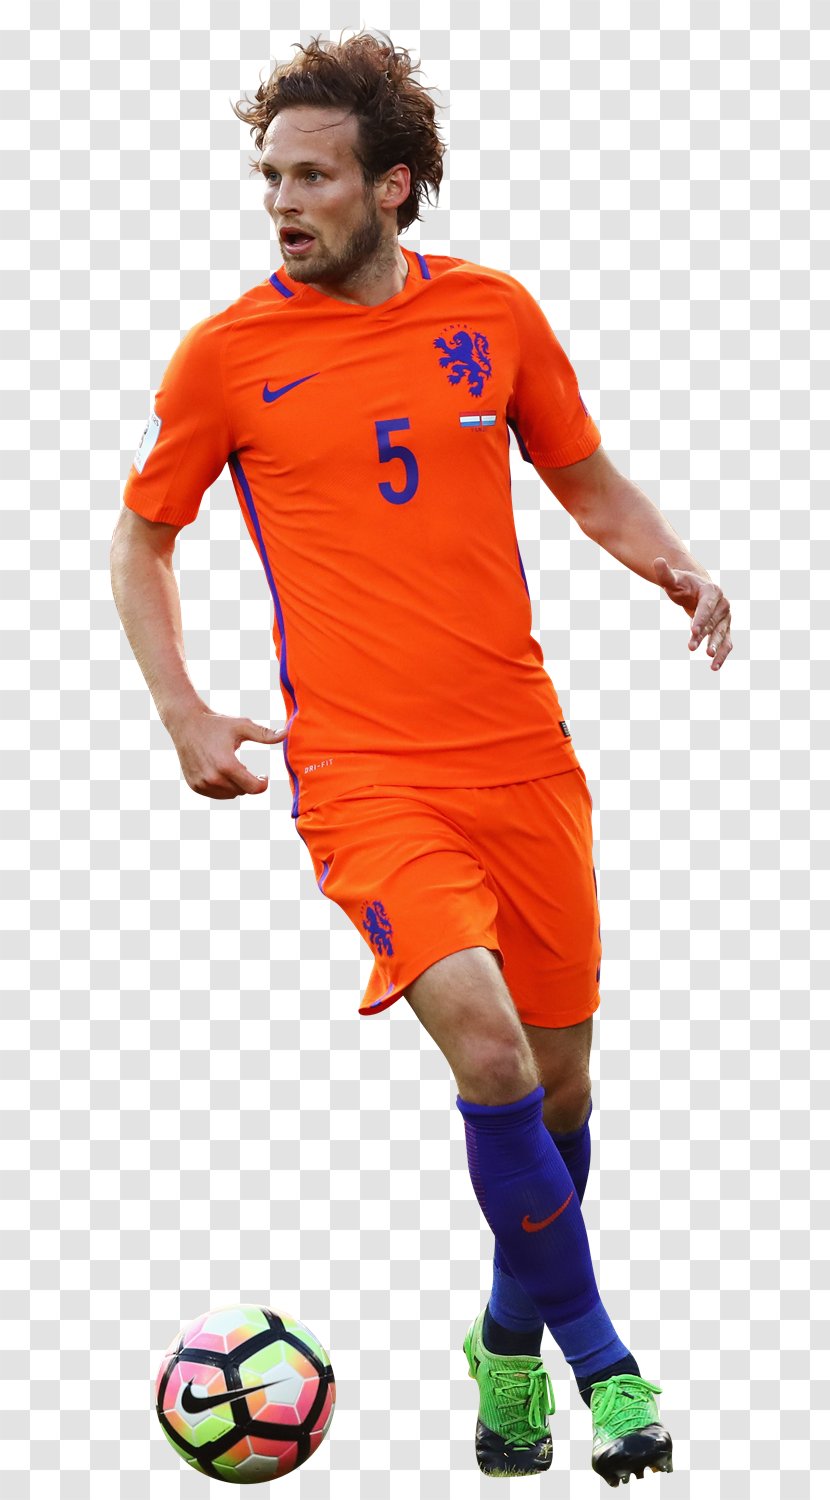 Daley Blind Jersey Soccer Player Football - T Shirt Transparent PNG